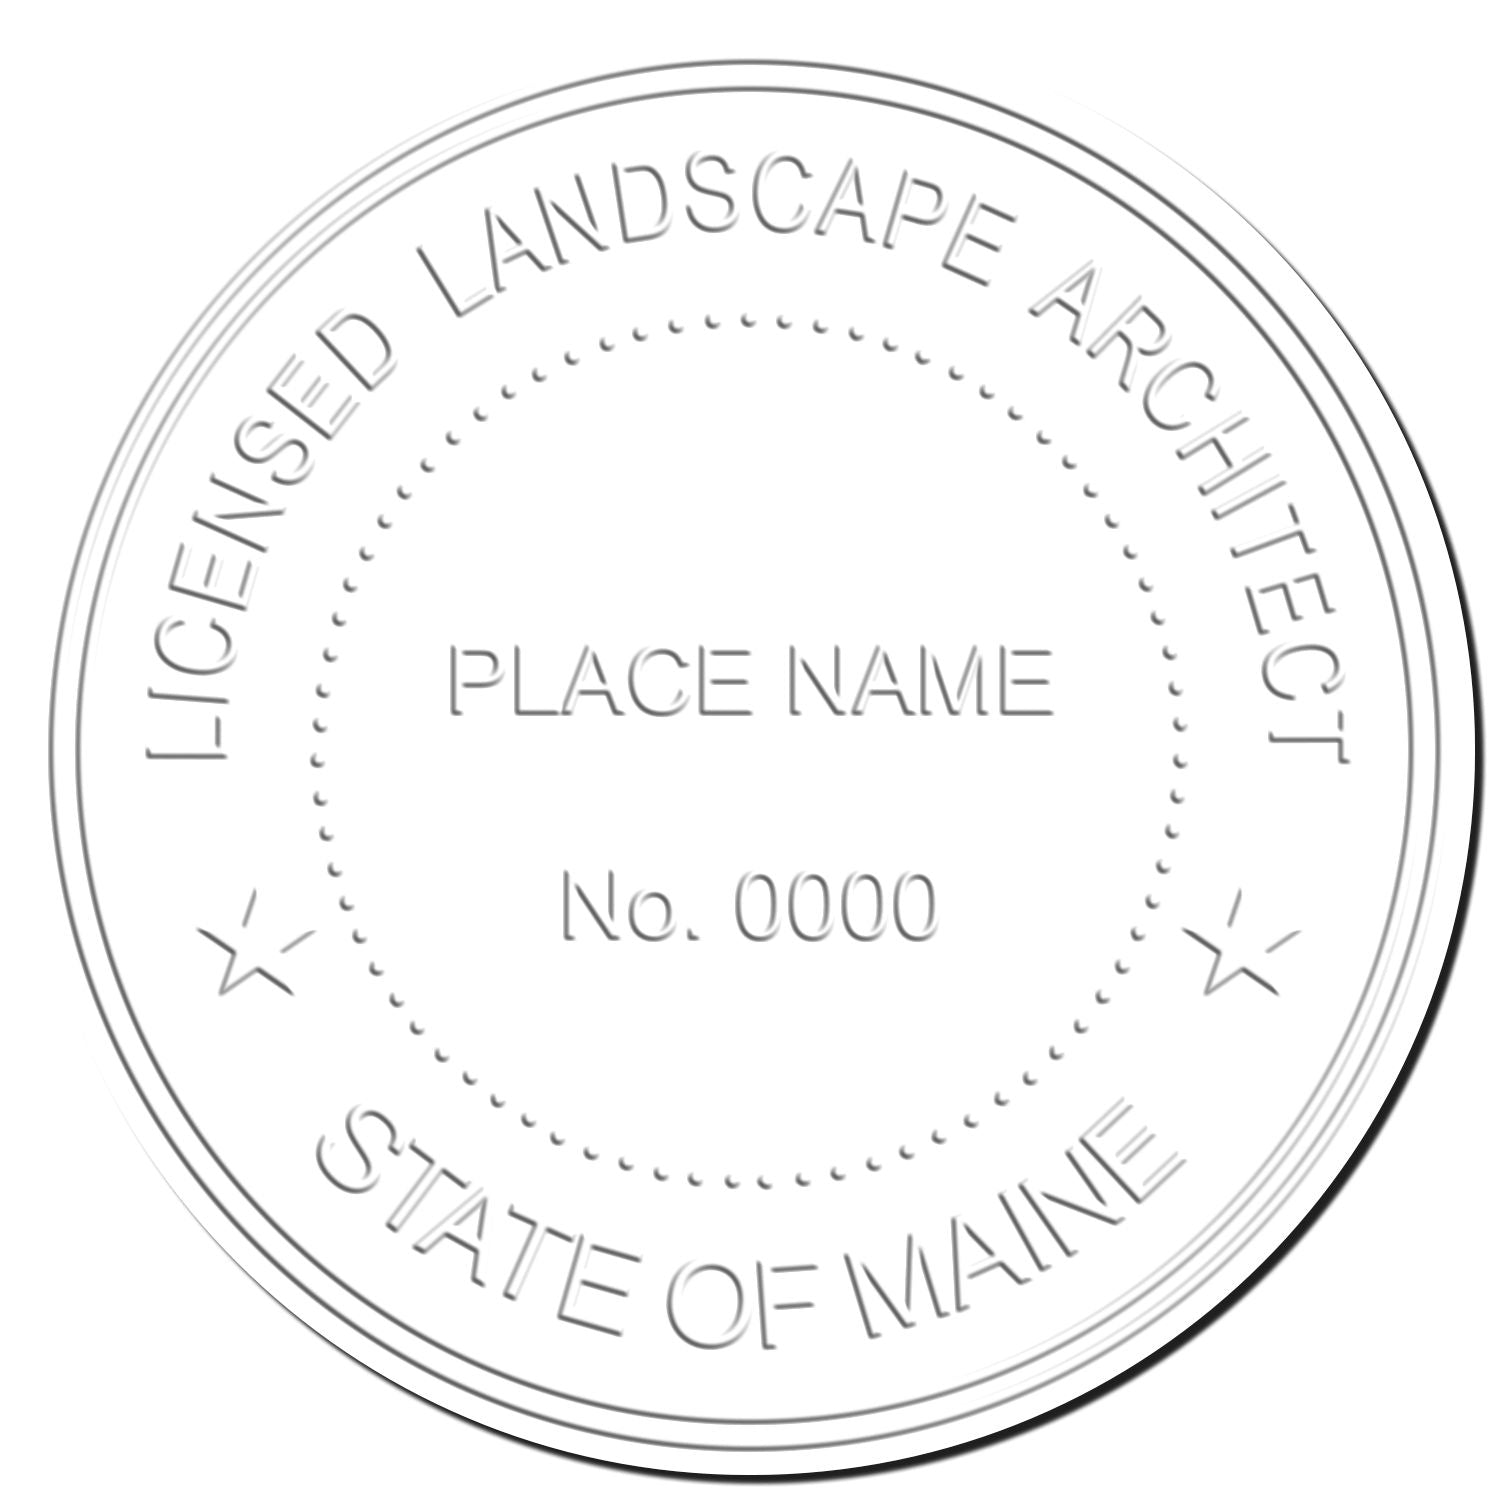 This paper is stamped with a sample imprint of the Maine Long Reach Landscape Architect Embossing Stamp, signifying its quality and reliability.